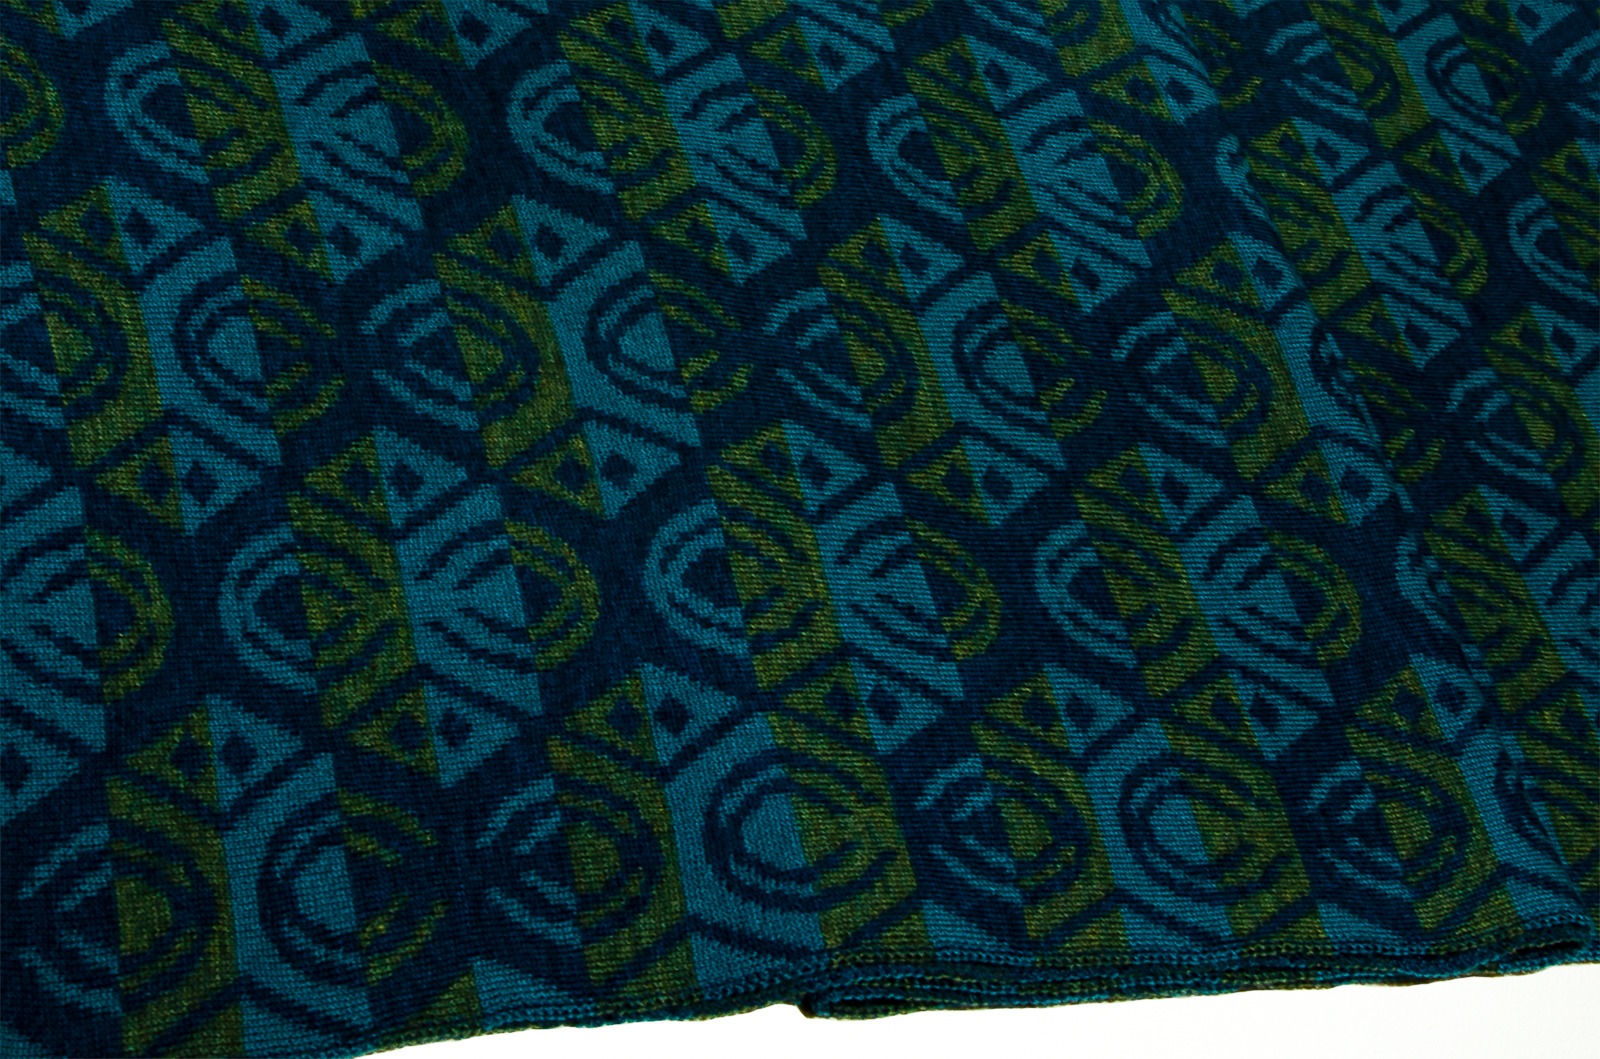 Merino scarf Lotos 3-colored in petrol, dark green and turquoise